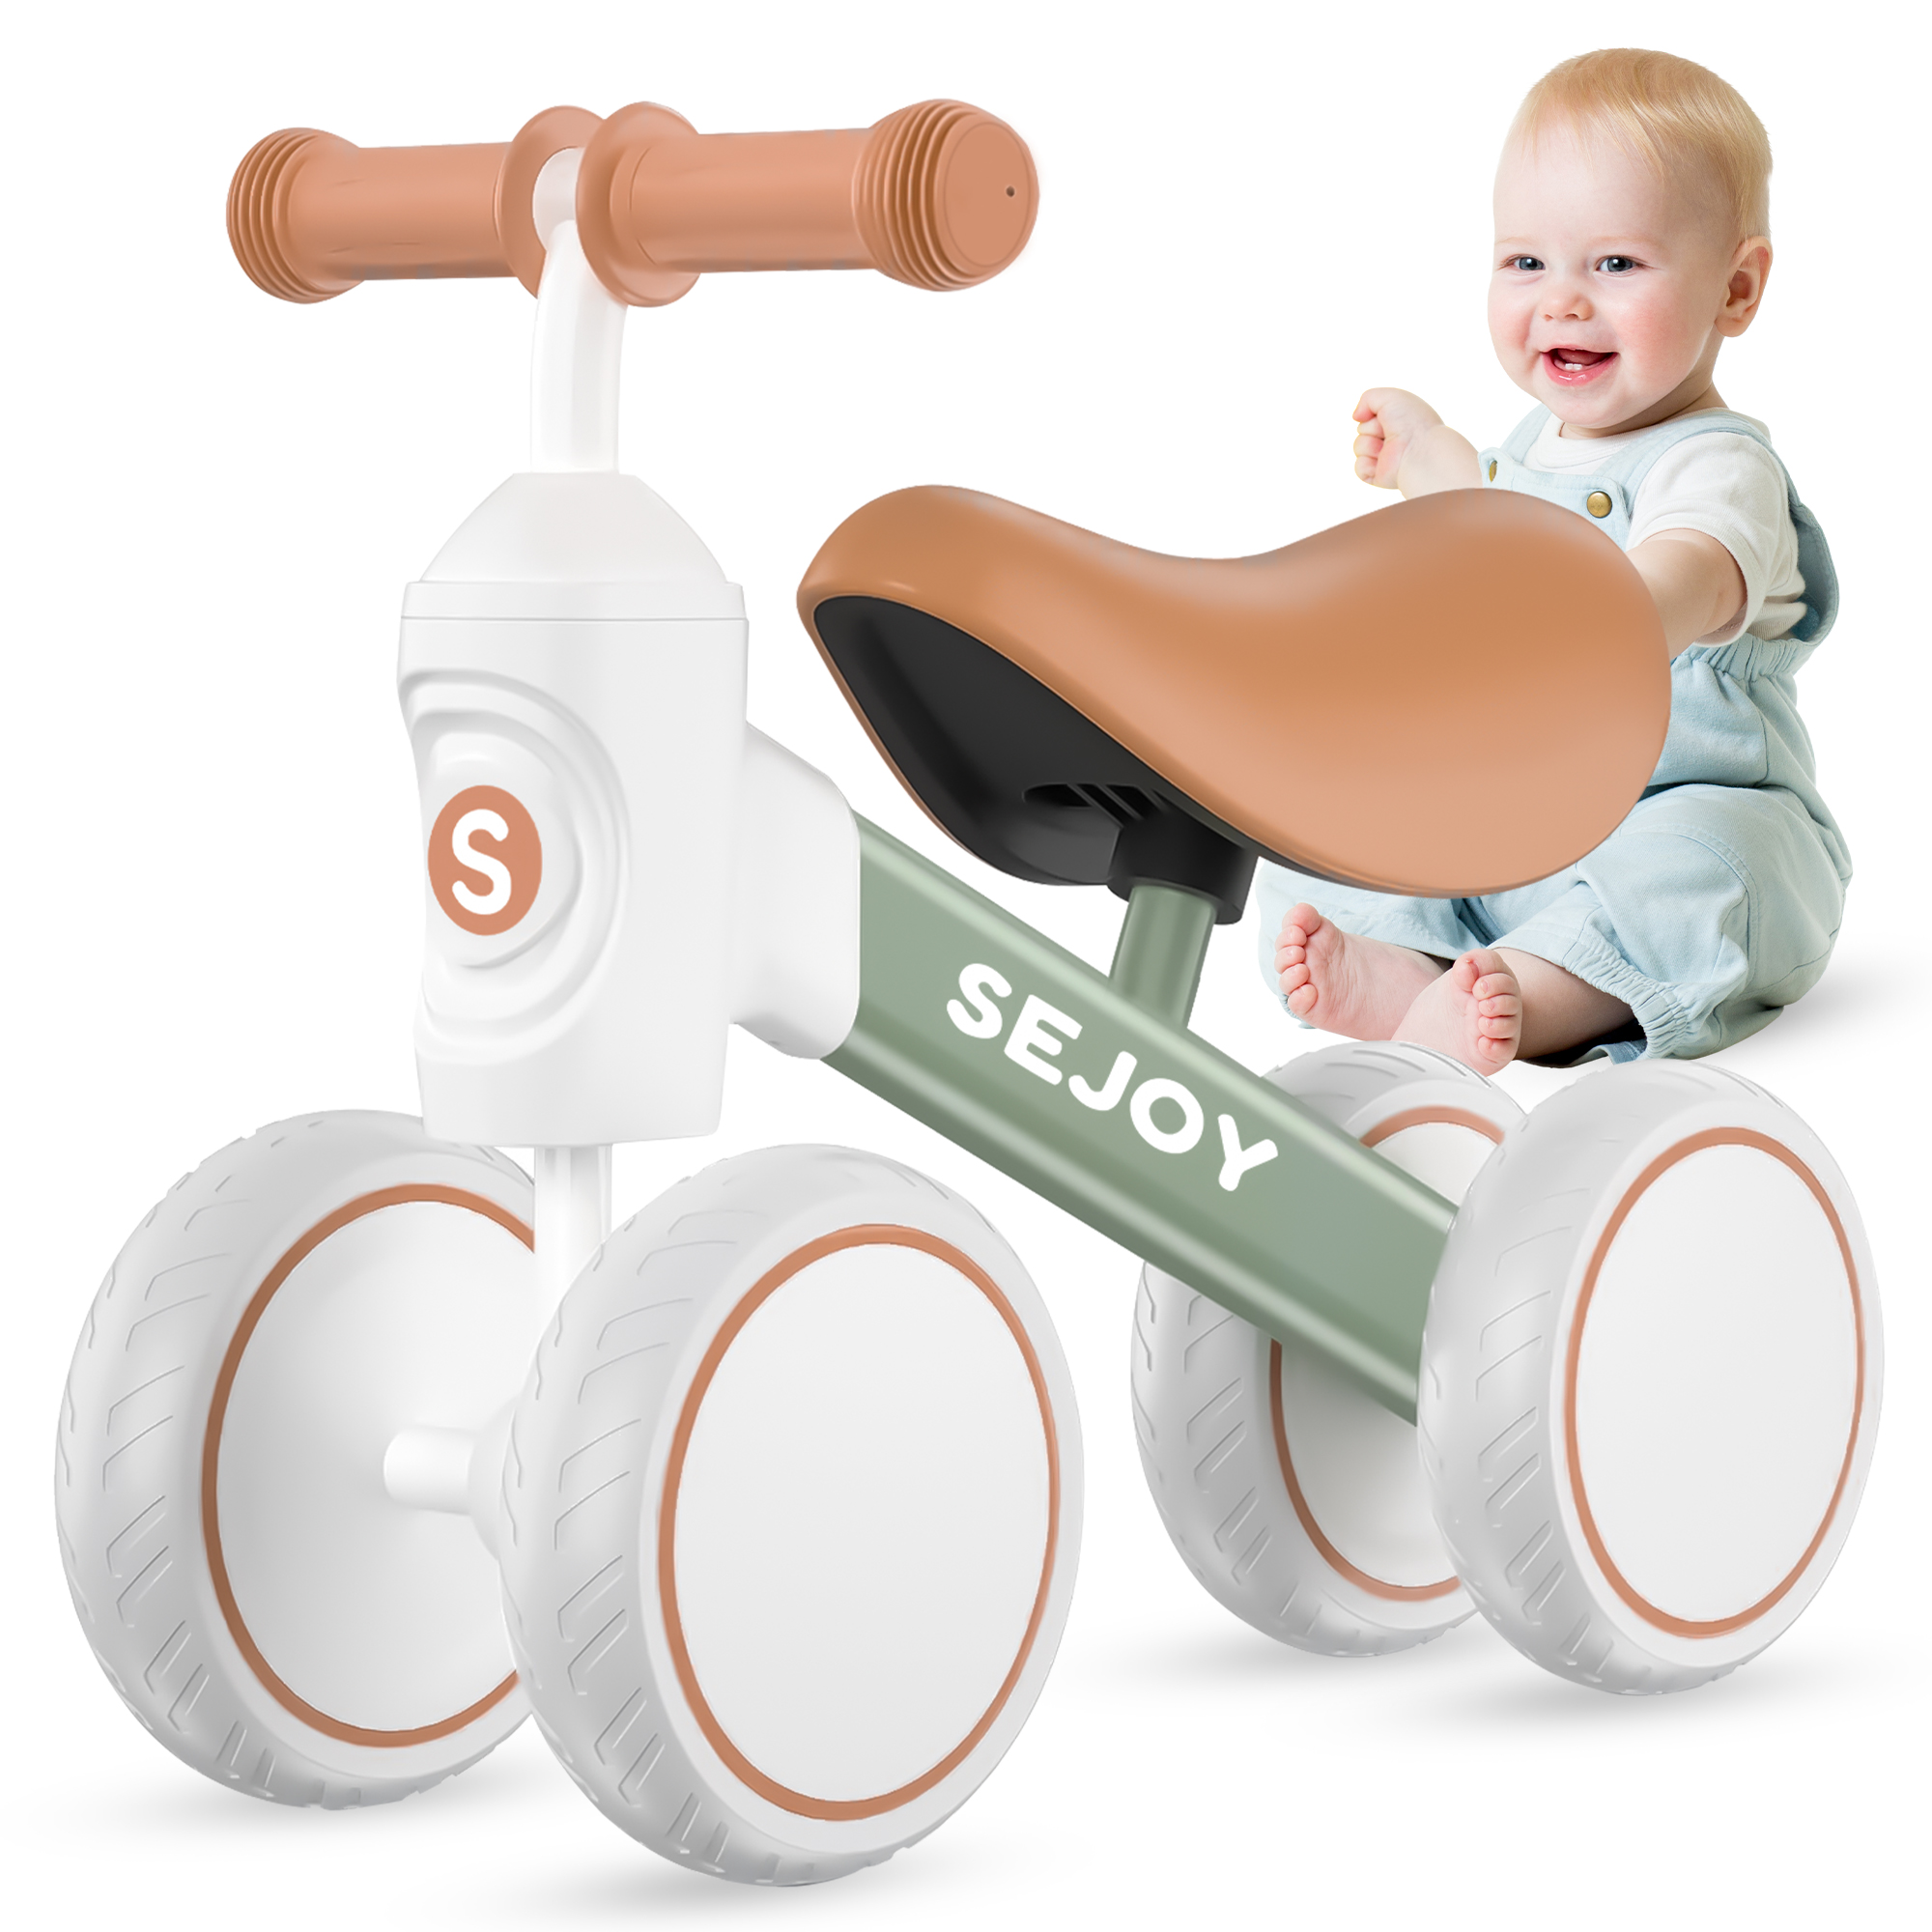 Sejoy Baby Balance Bike, 10-36 Month Kids Toddler Walker, 4 Wheels Riding Toys for Boys and Girls, First Birthday Gifts - image 1 of 7